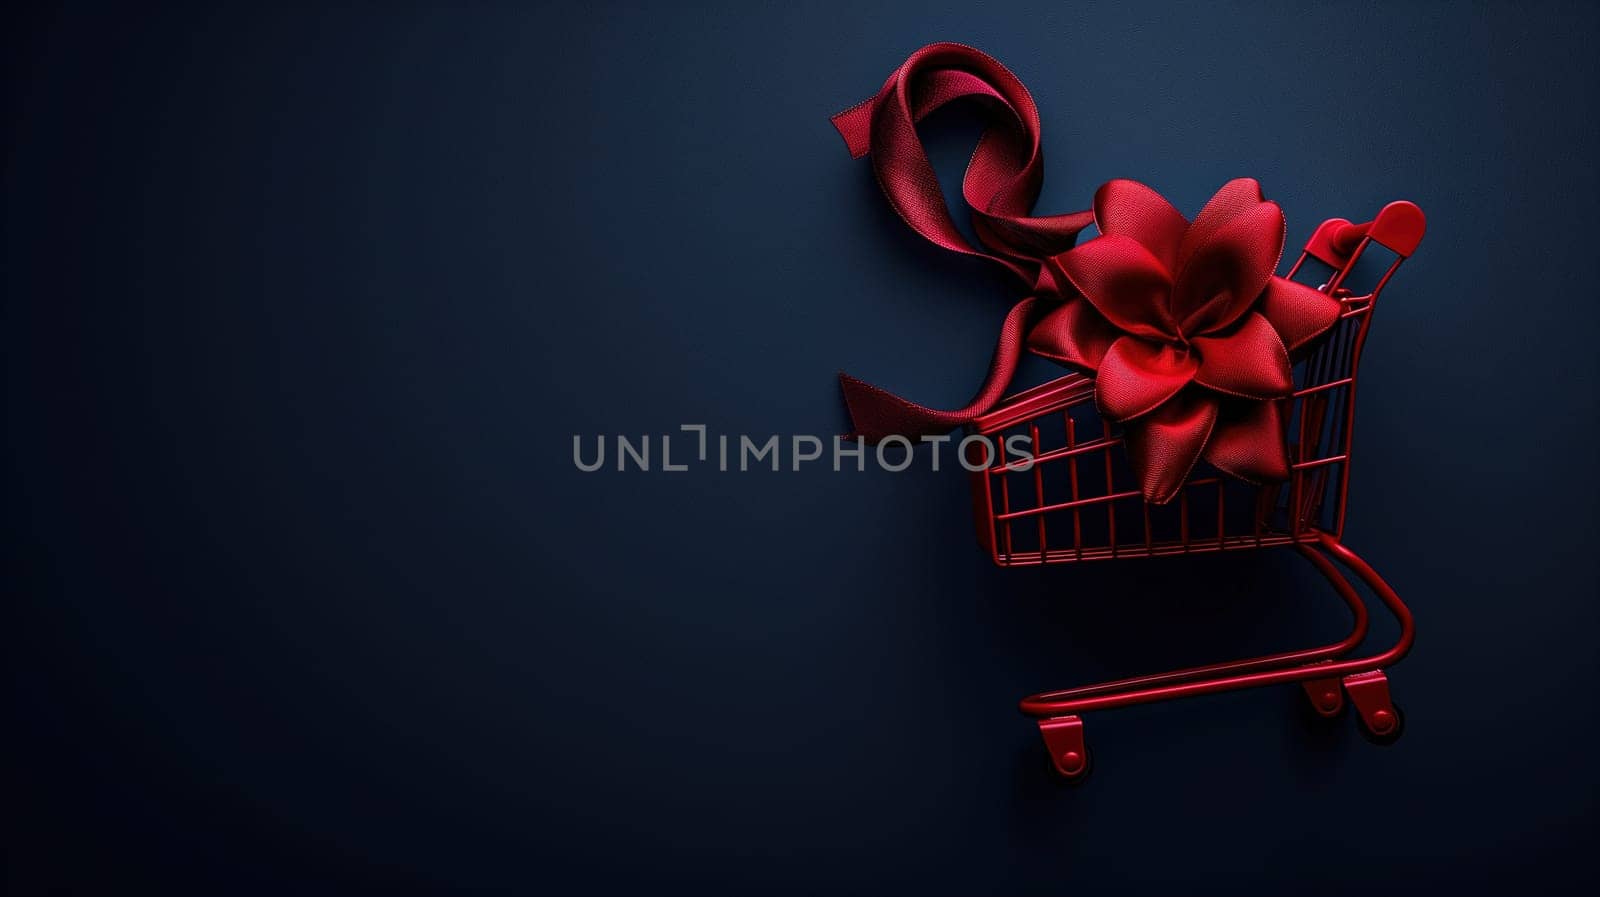 A black shopping cart adorned with a vibrant red bow, symbolizing a sale or Black Friday promotion. The cart is ready to be filled with discounted items.